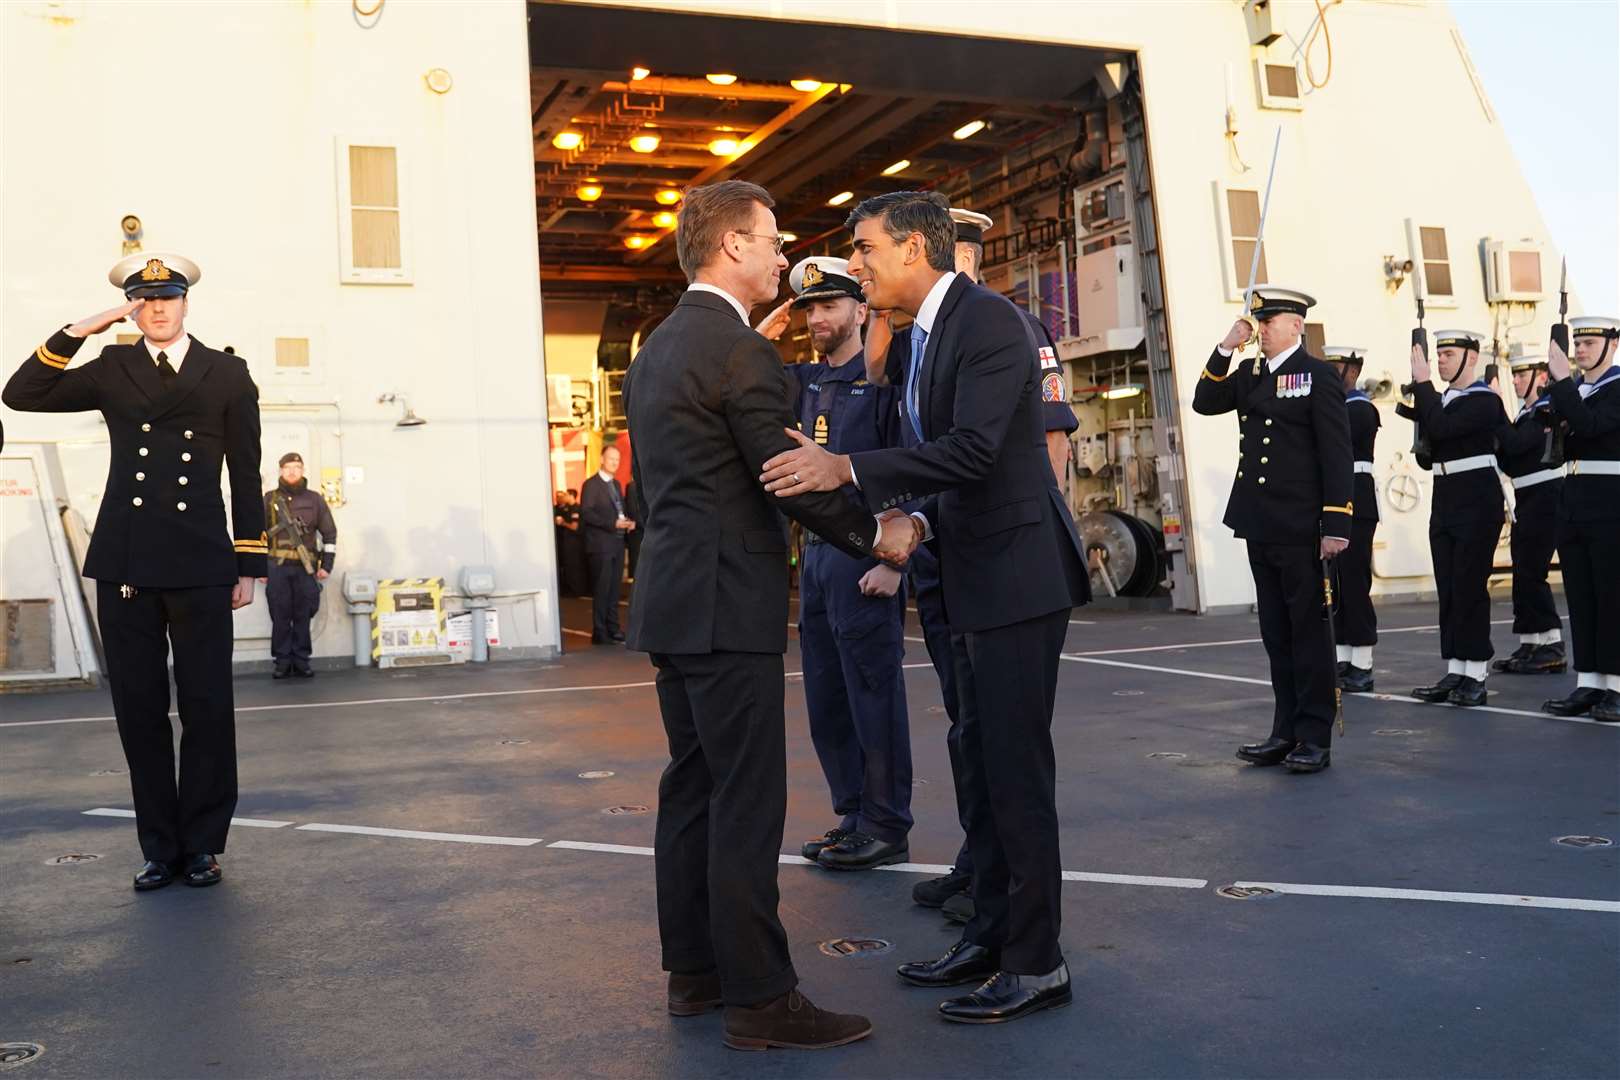 The Prime Minister welcomes Swedish counterpart Ulf Kristersson on board HMS Diamond (Stefan Rousseau/PA)